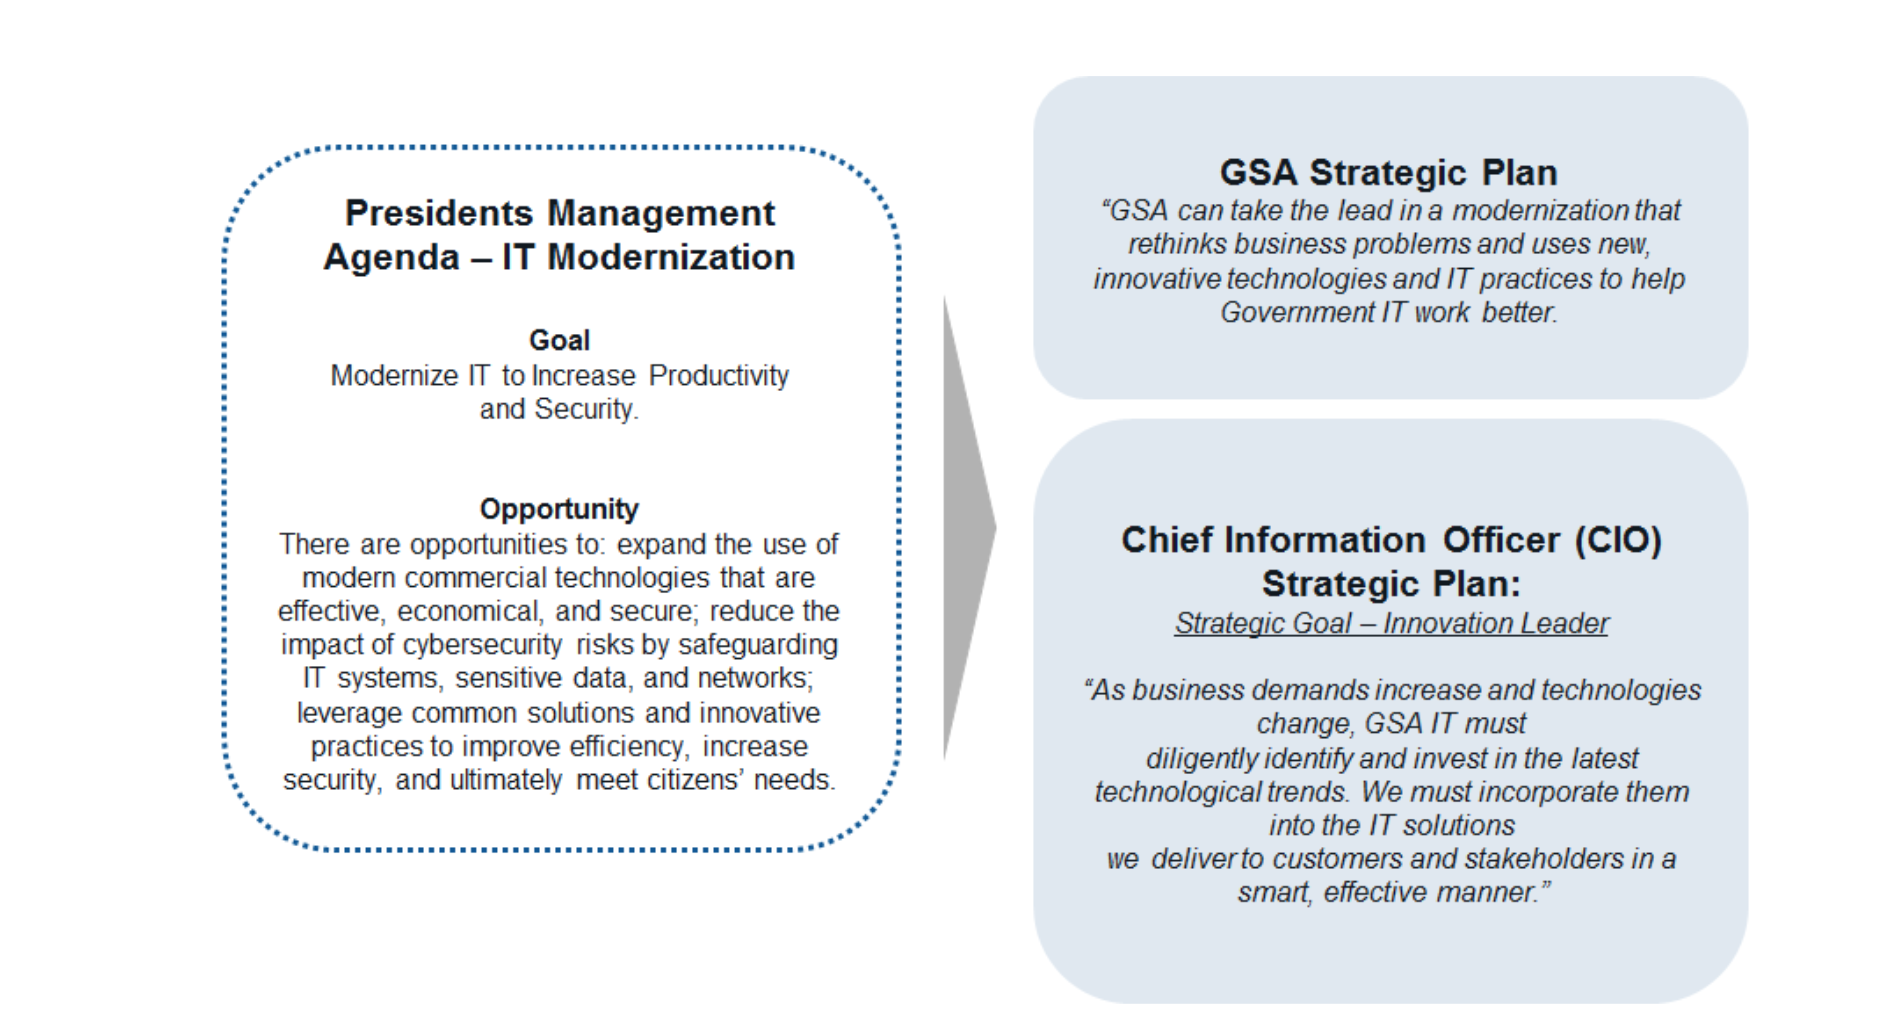 Diagram showing the President's Management Agenda for IT Modernization feeding into the GSA Strategic Plan and the CIO Strategic Plan. The President's Management Agenda lists a goal and an opportunity. The goal is "Modernize IT to increase productivity and security". The opportunity is "There are opportunities to: expand the use of modern commercial technologies that are effective, economical, and secure; reduce the impact of cybersecurity risks by safeguarding IT systems, sensitive data, and networks; leverage common solutions and innovative practices to improve efficiency, increase security, and ultimately meet citizens' needs."